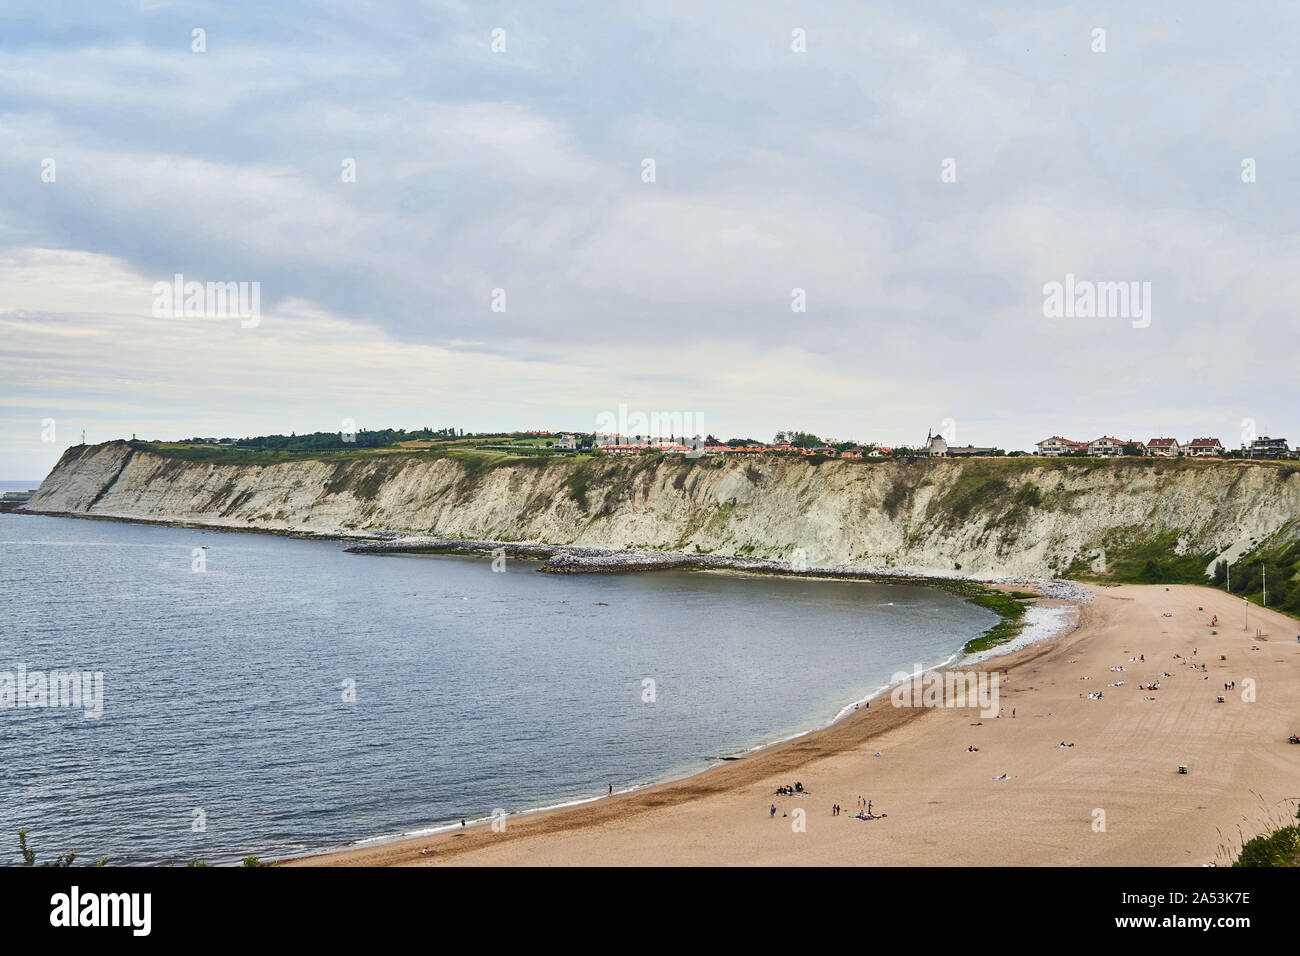 A view across Arrigunaga beach to the cliffs near Algorta in the bay of biscay Stock Photo